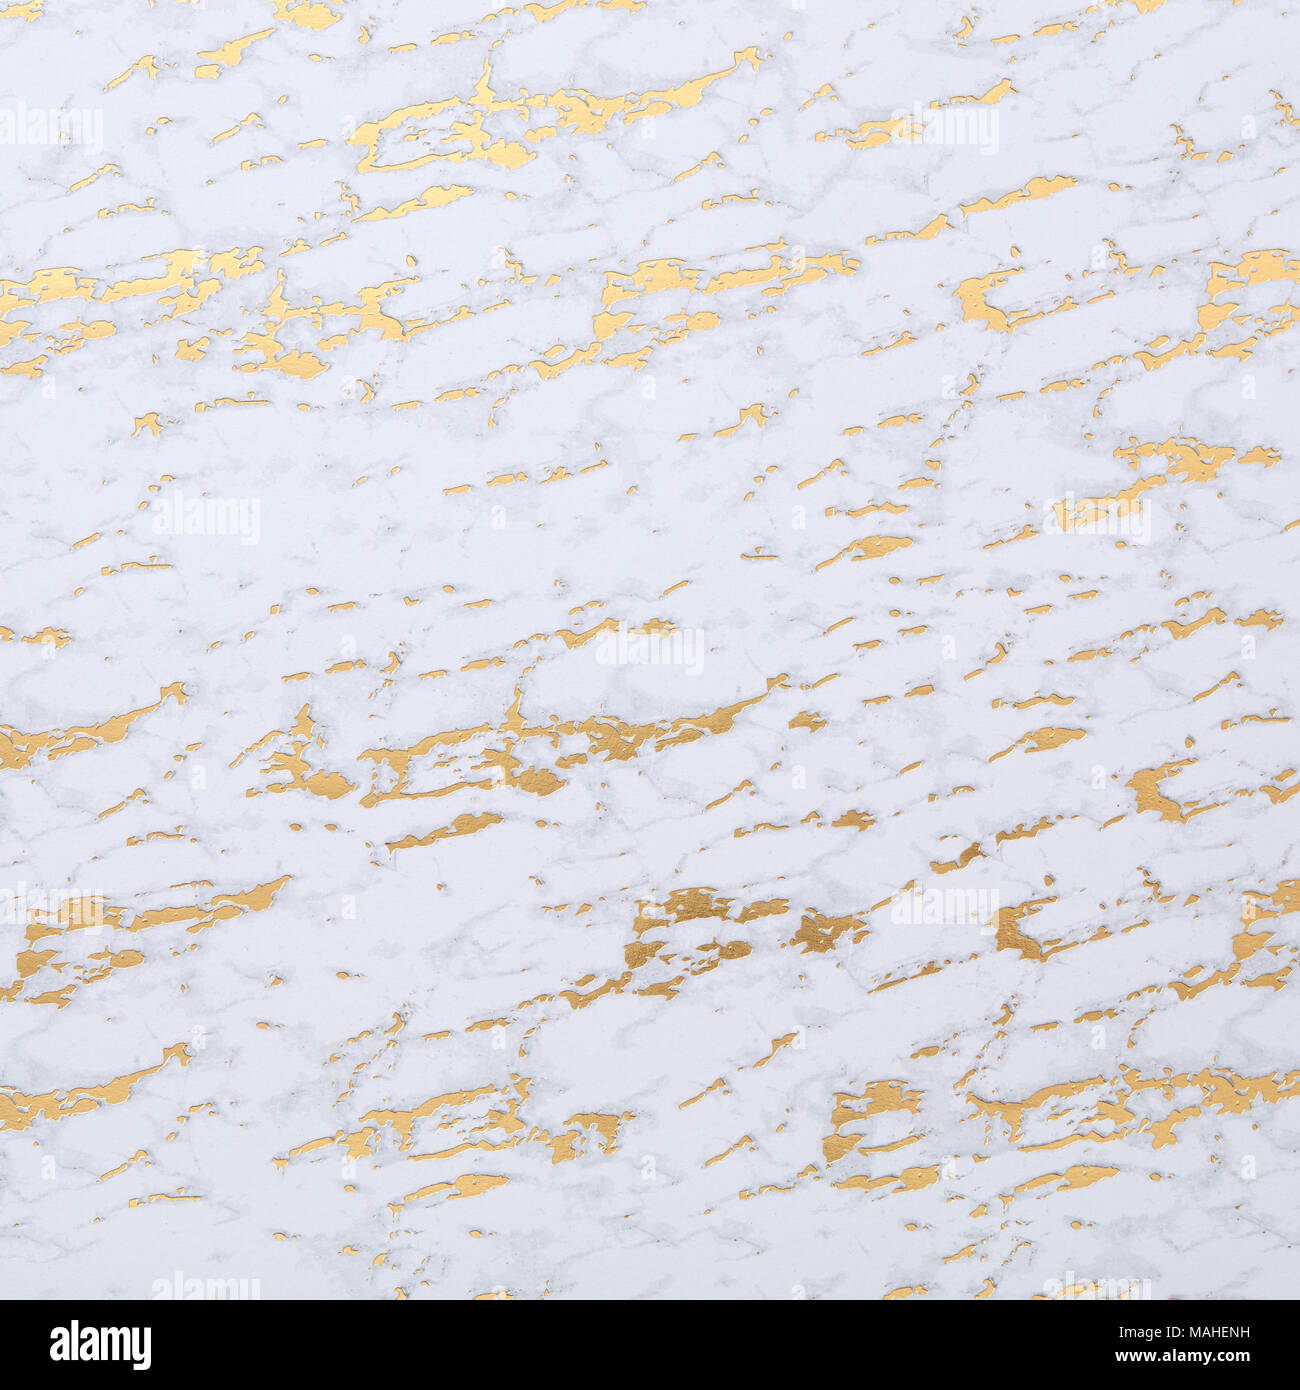 Gold, white, and grey marble background for social media backgrounds and space to insert text or images. Stock Photo